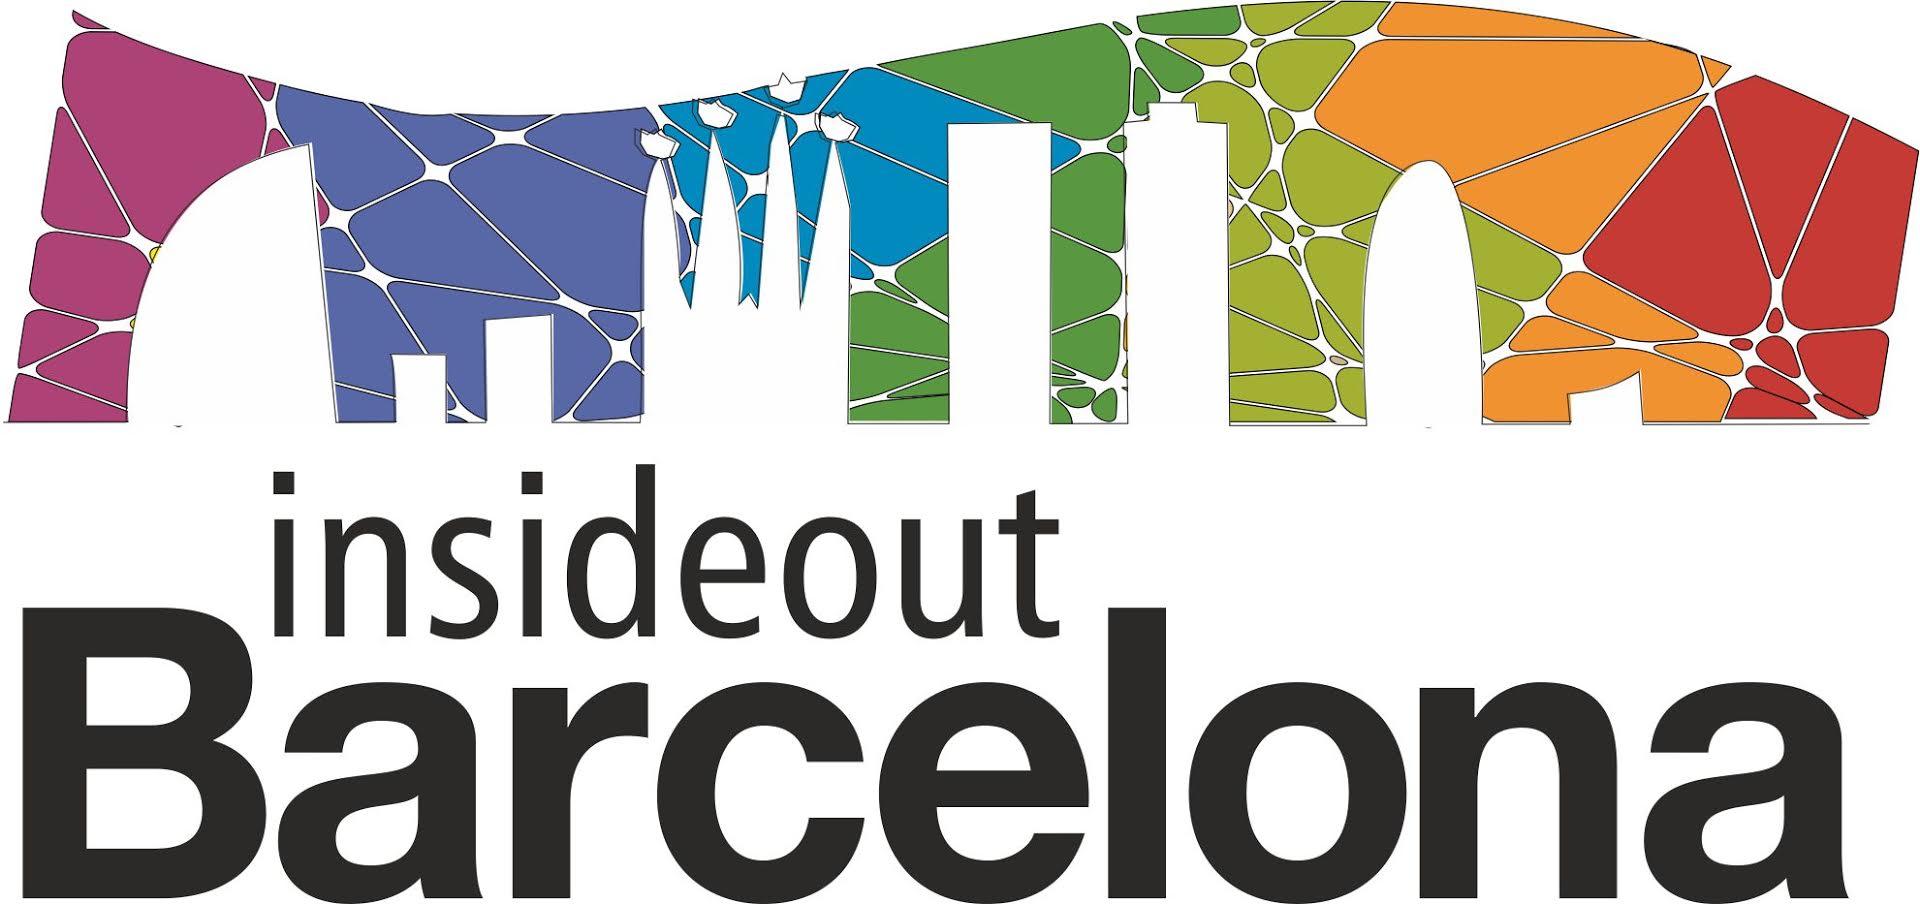 Insideout Barcelona - Events and guide Barcelona